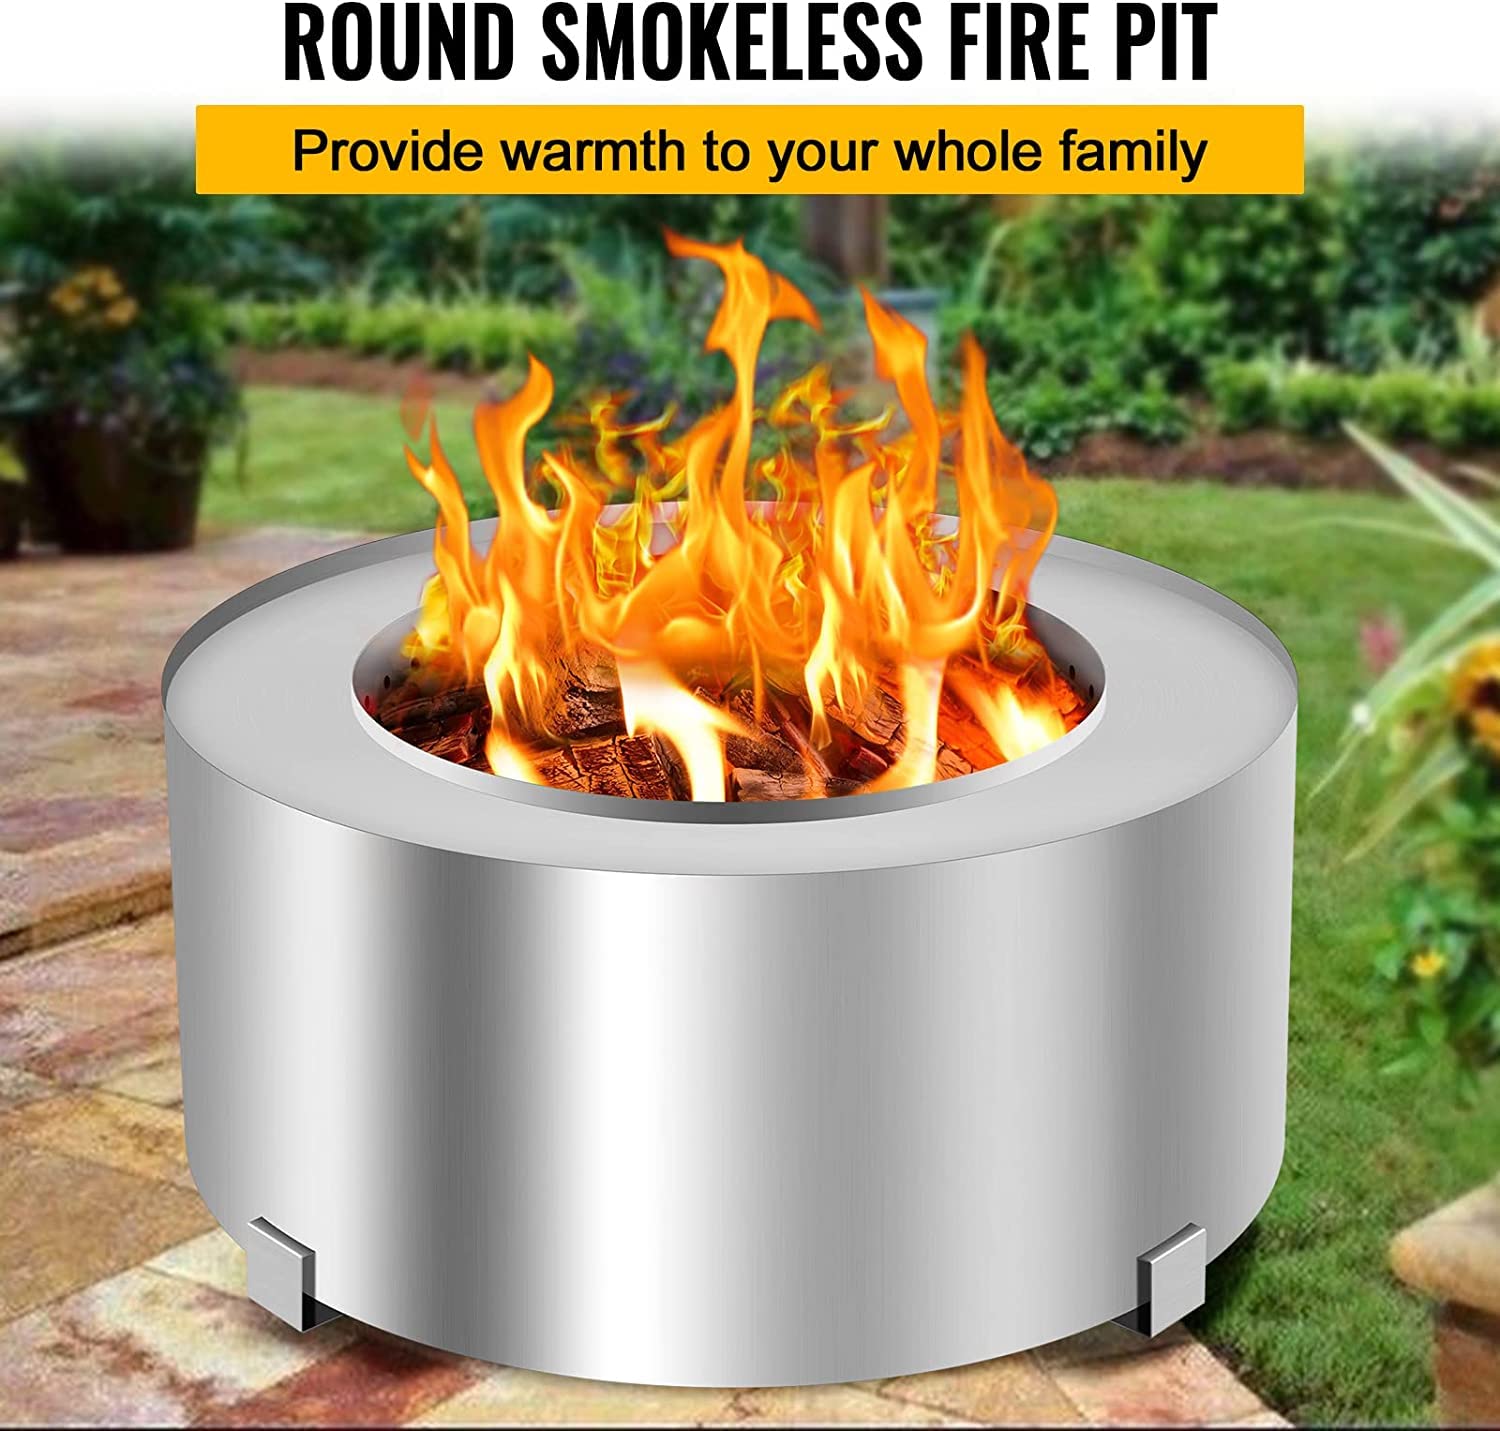 Smokeless Fire Pits Large Wood Burning Fire Pit Carbon Steel Stove Bonfire Fire Pit Portable Outdoor Fire Bowl for Picnic Camping Backyard (28.5 Inch)